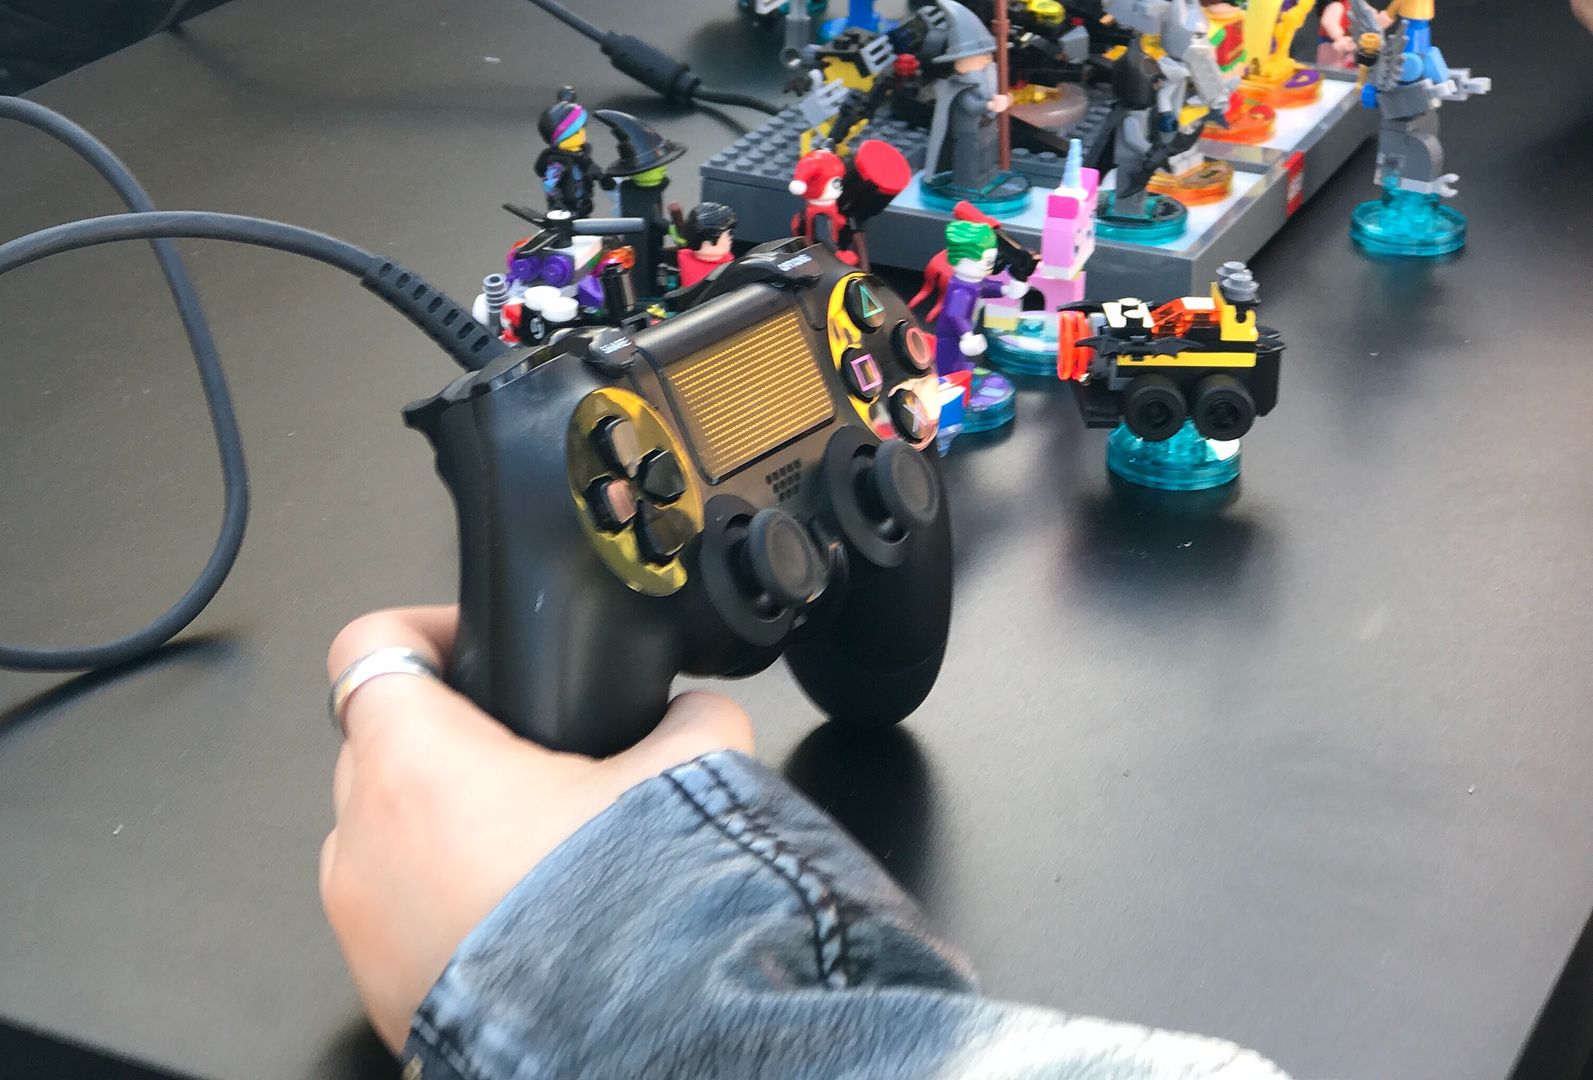 LEGO Batman Movie Premiere: video game controller with minifigs attached. Nice touch!